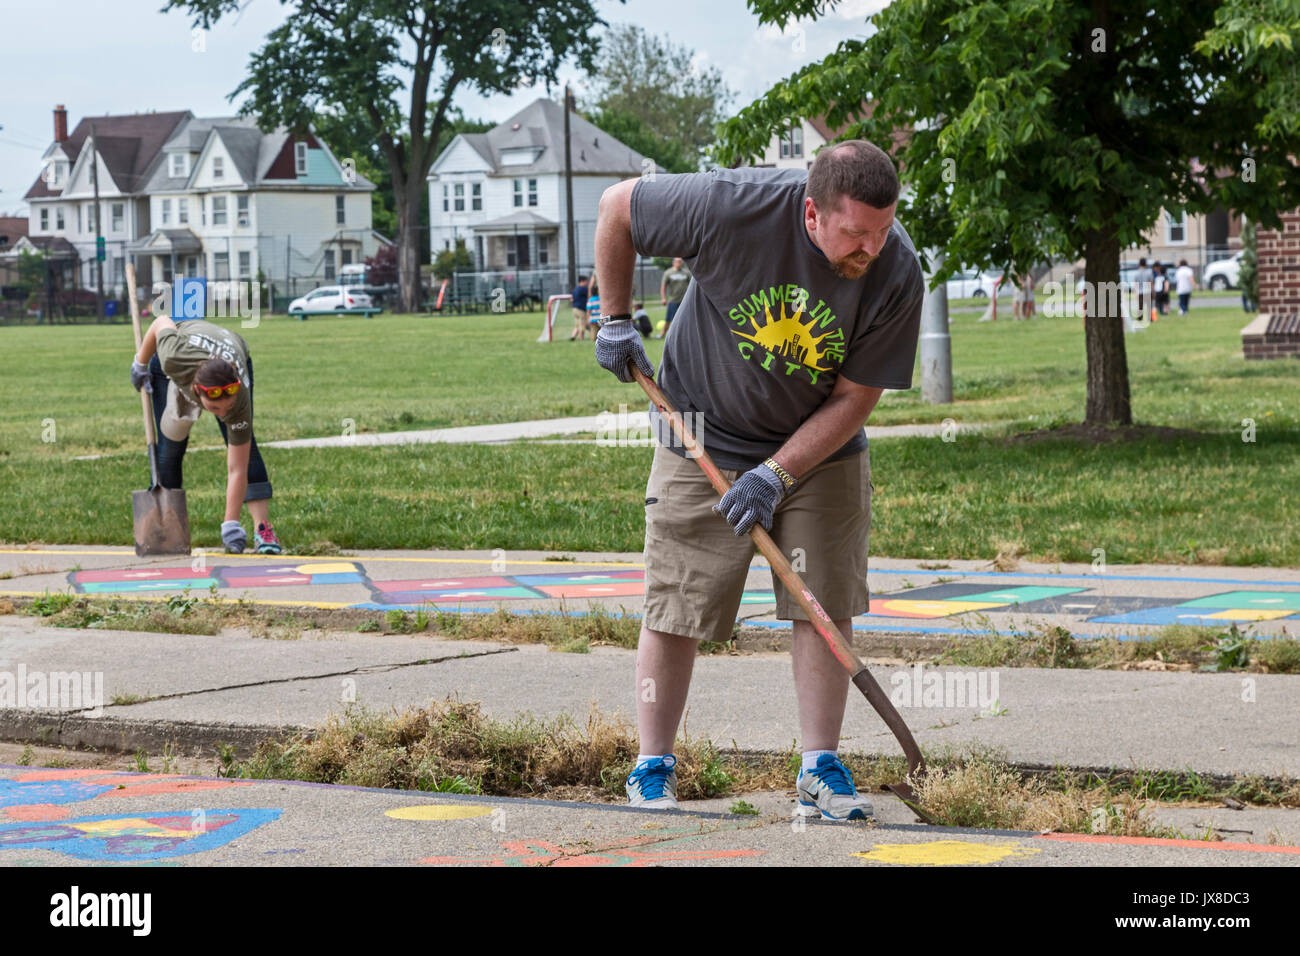 Detroit, Michigan - Volunteers from Fiat Chrysler Automobiles (FCA) clean weeds from the playground at Clark Park as part of the Summer in the City pr Stock Photo